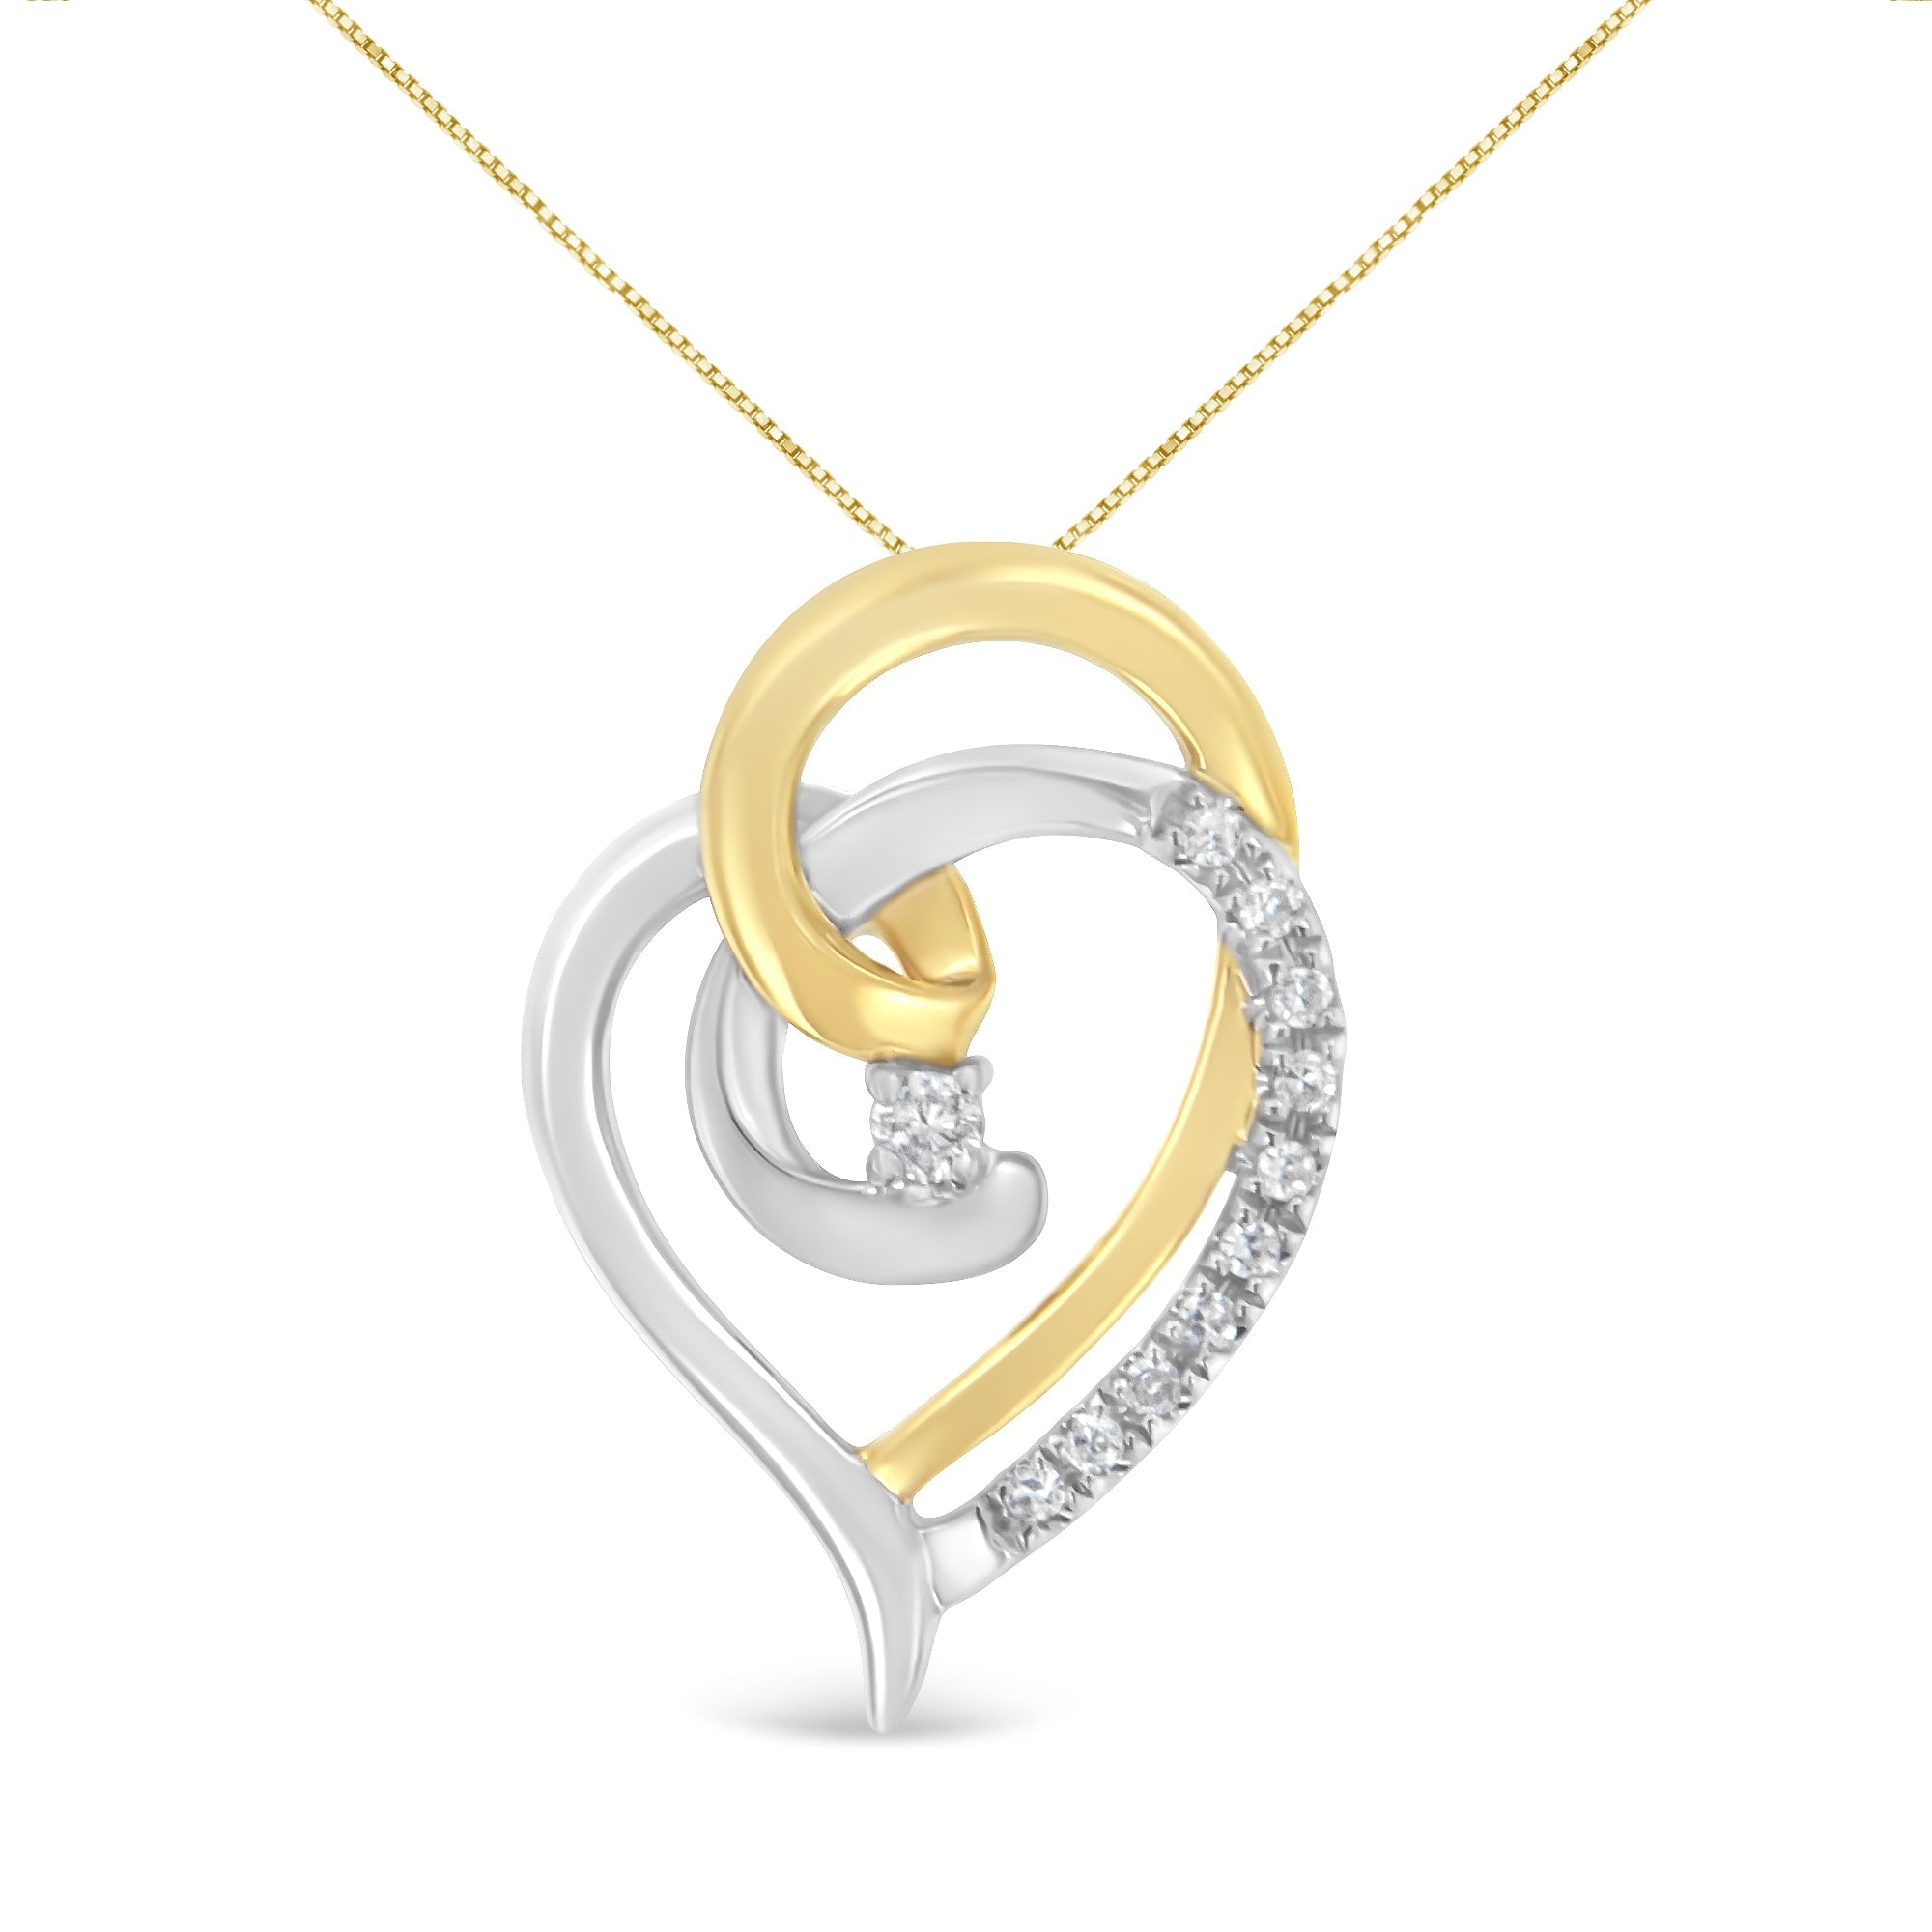 10K Yellow and White Gold Diamond Accent Open Double Heart Spiral Curl 18" Pendant Necklace (J-K Color, I2-I3 Clarity) - LinkagejewelrydesignLinkagejewelrydesign